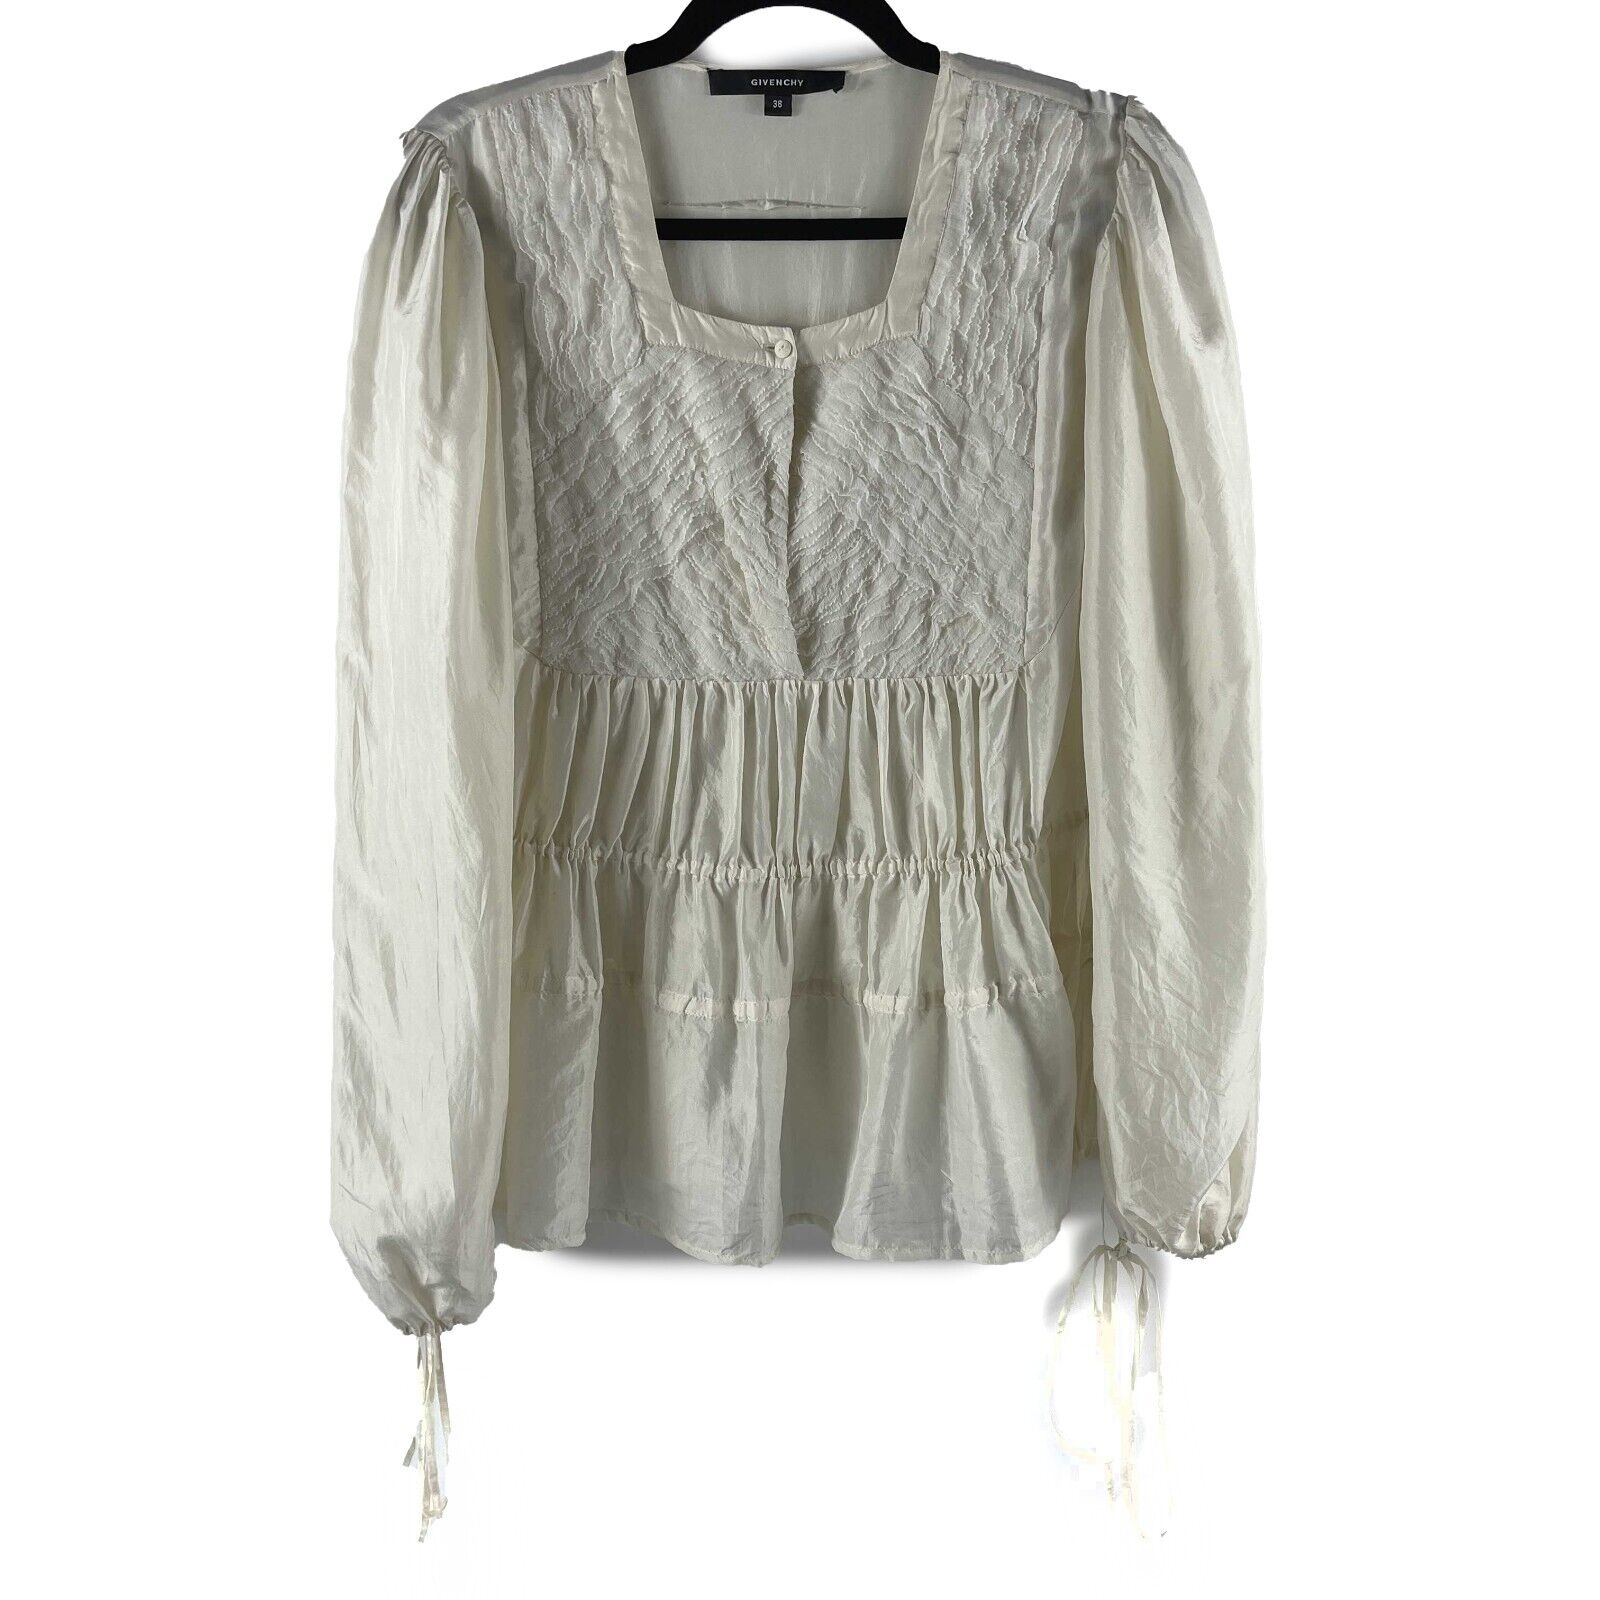 Givenchy - Pristine - Jaw String Ruffle Silk Blouse - Ivory Top